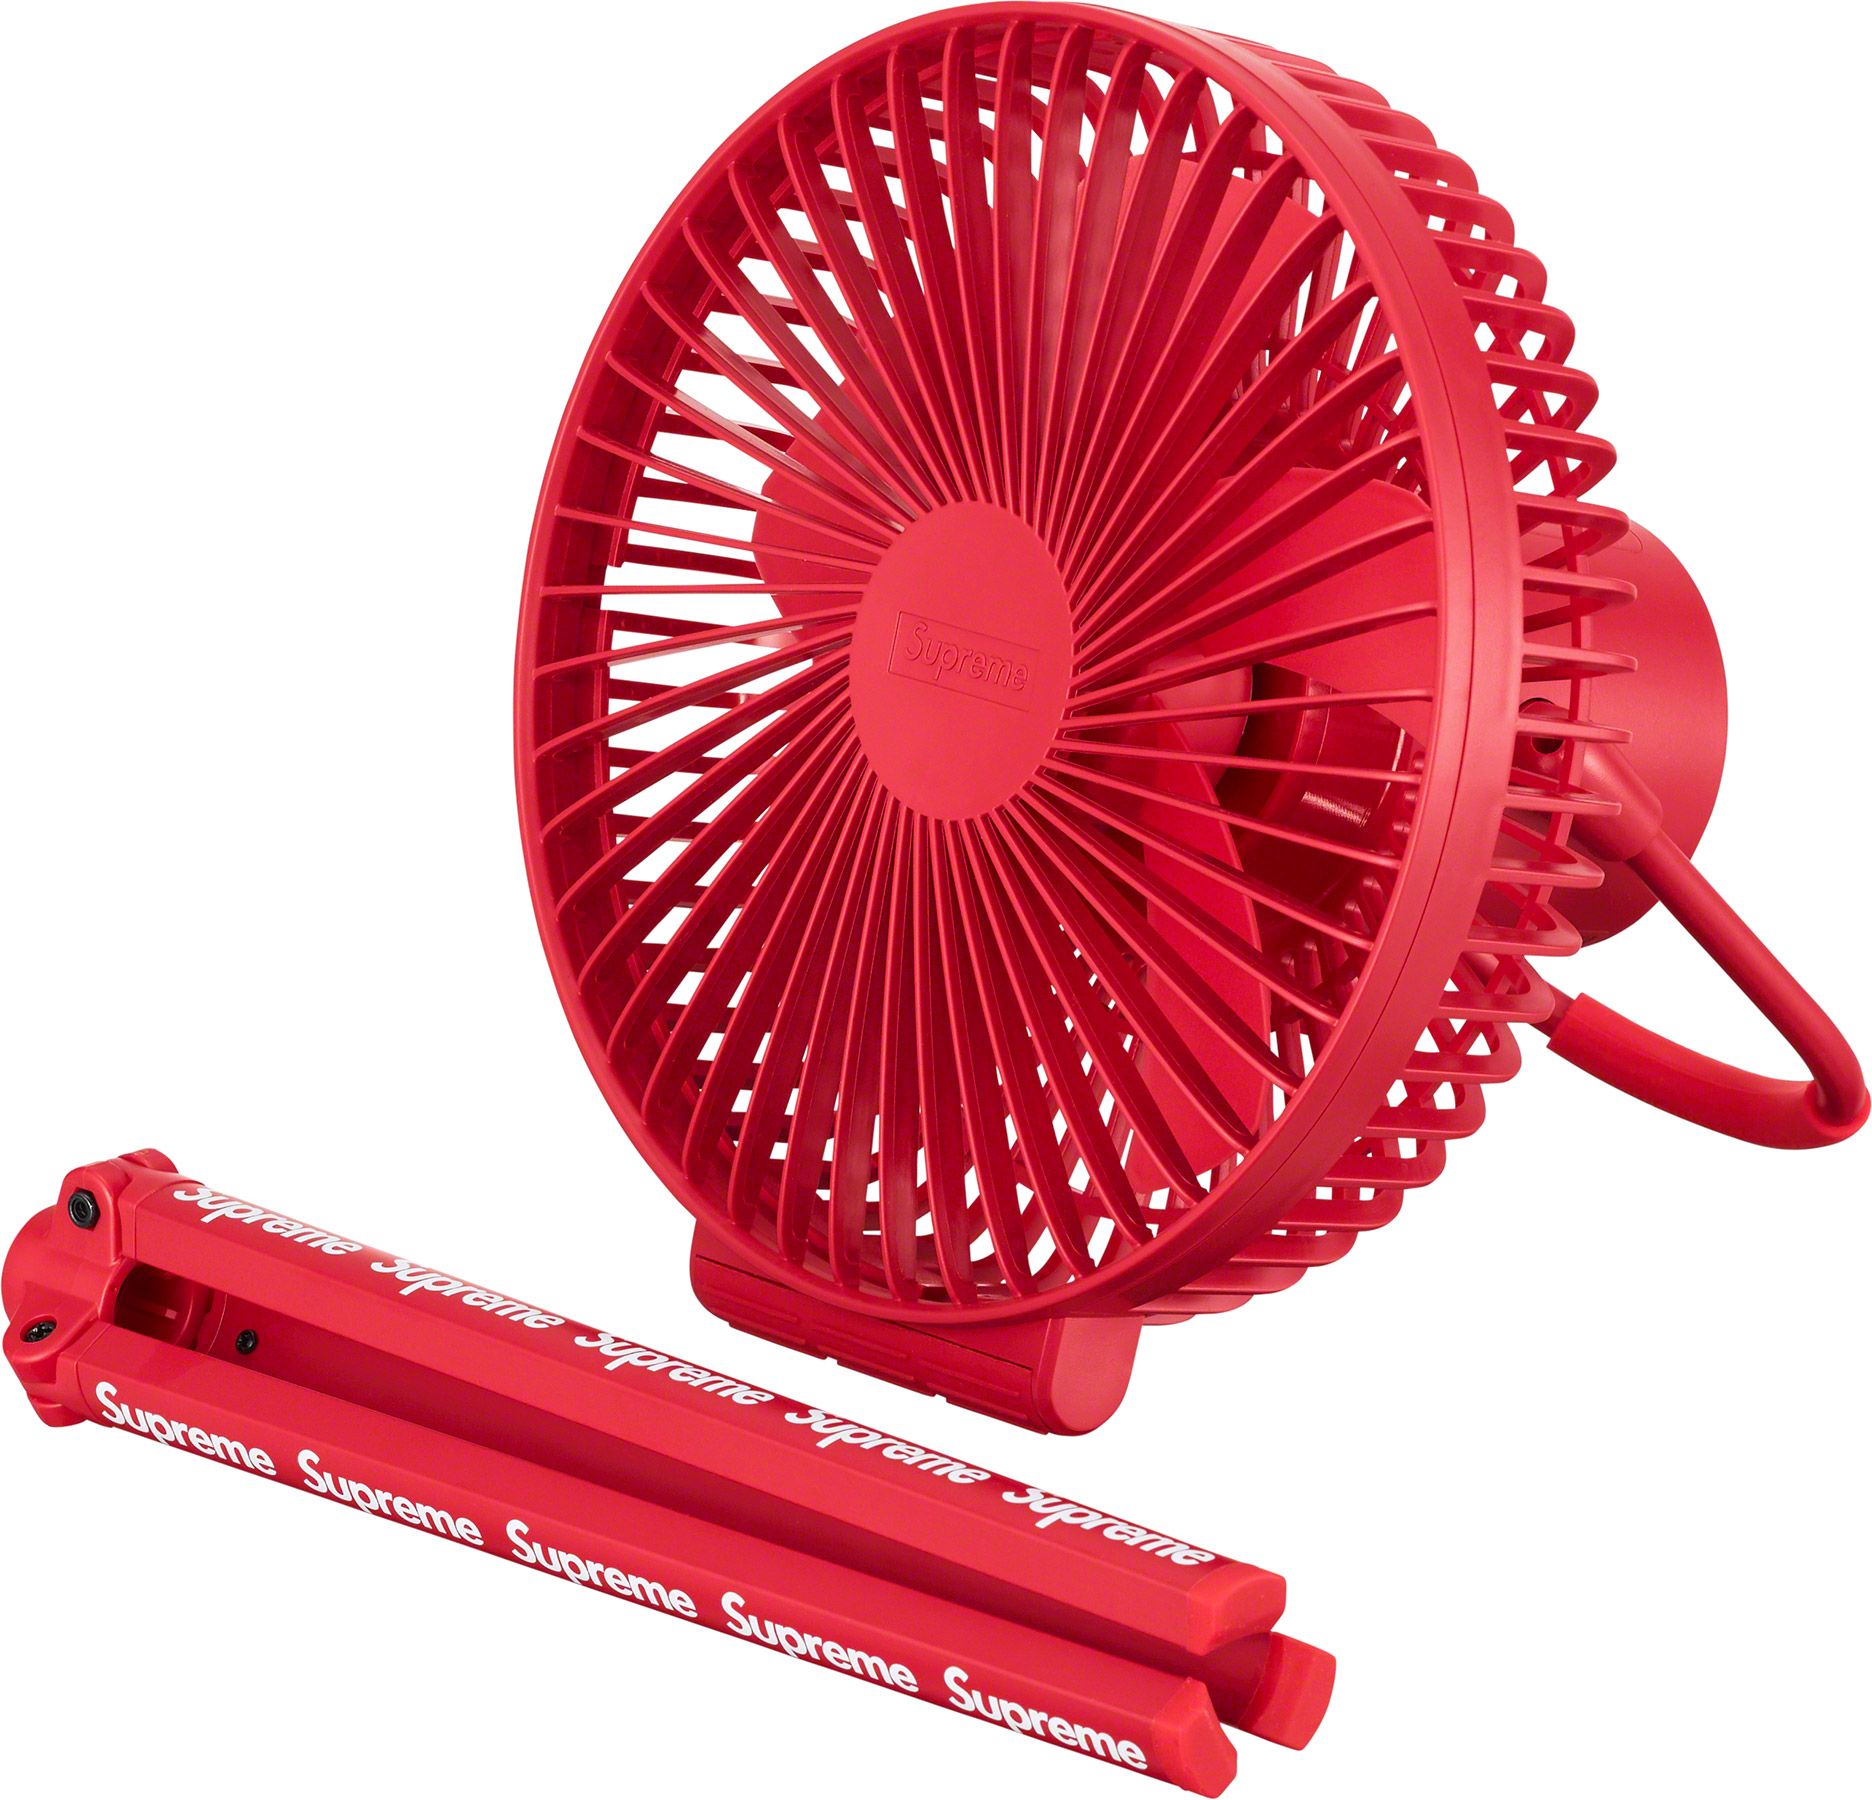 Supreme/Cargo Container Electric Fan 扇風機-